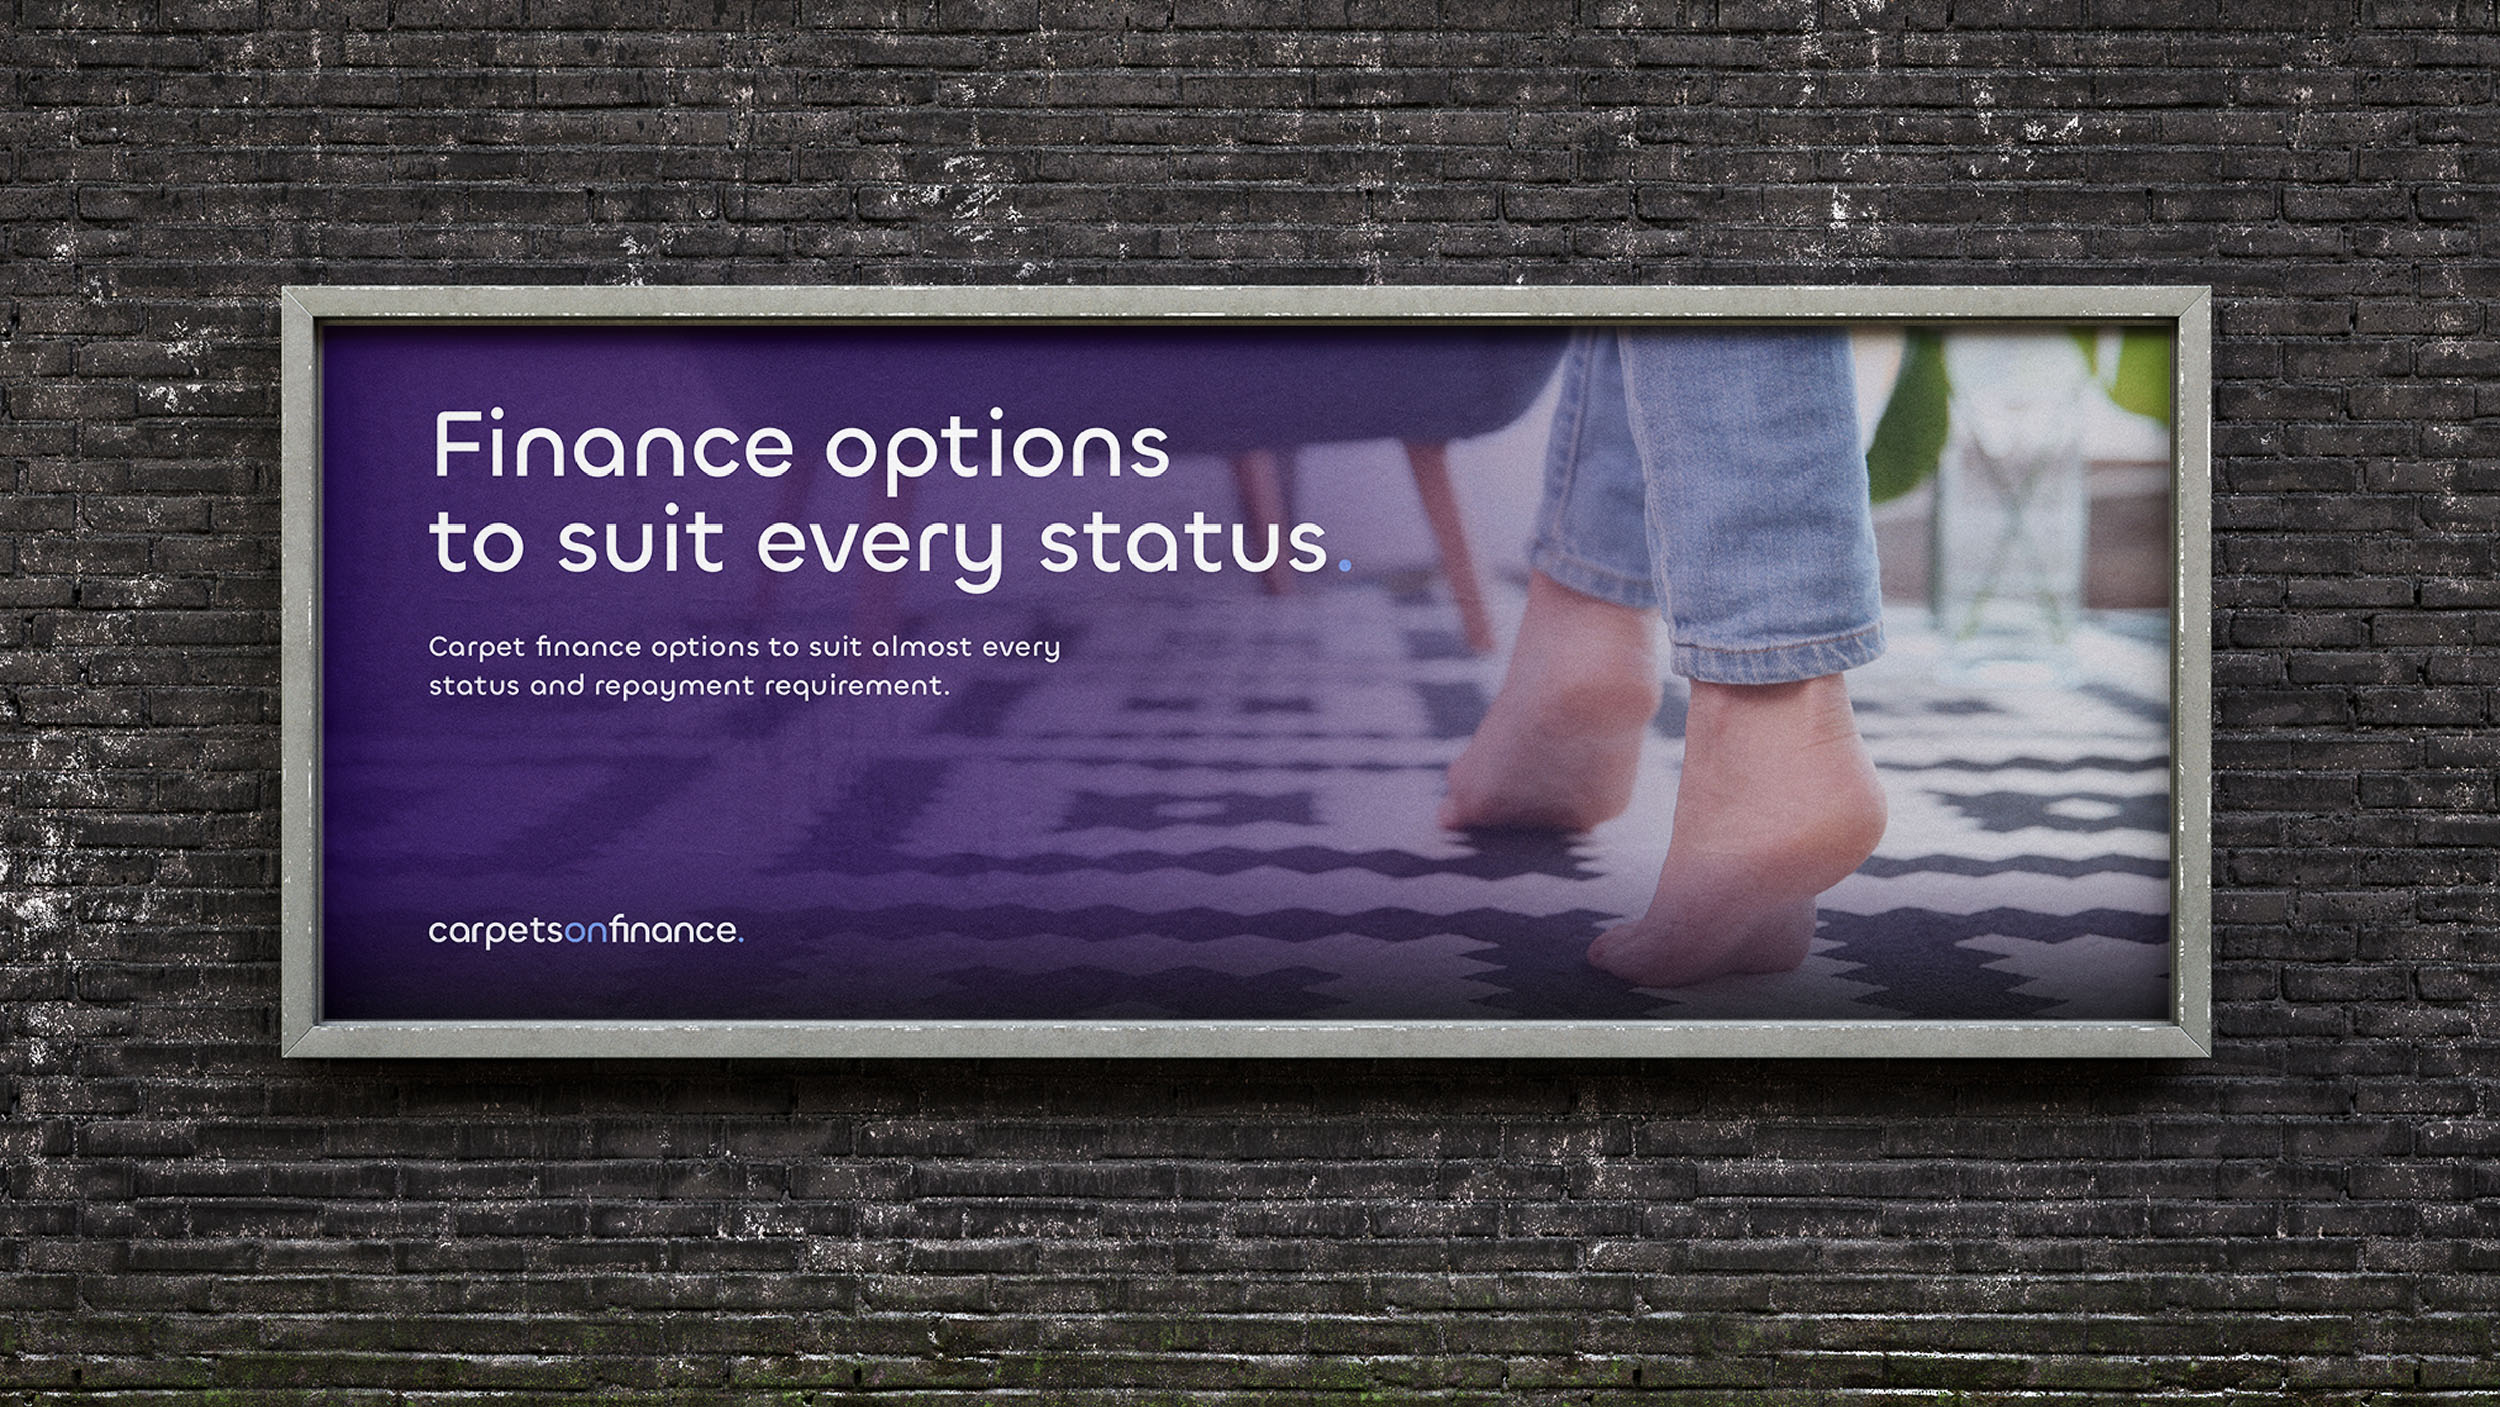 Billboard promotional image for finance company